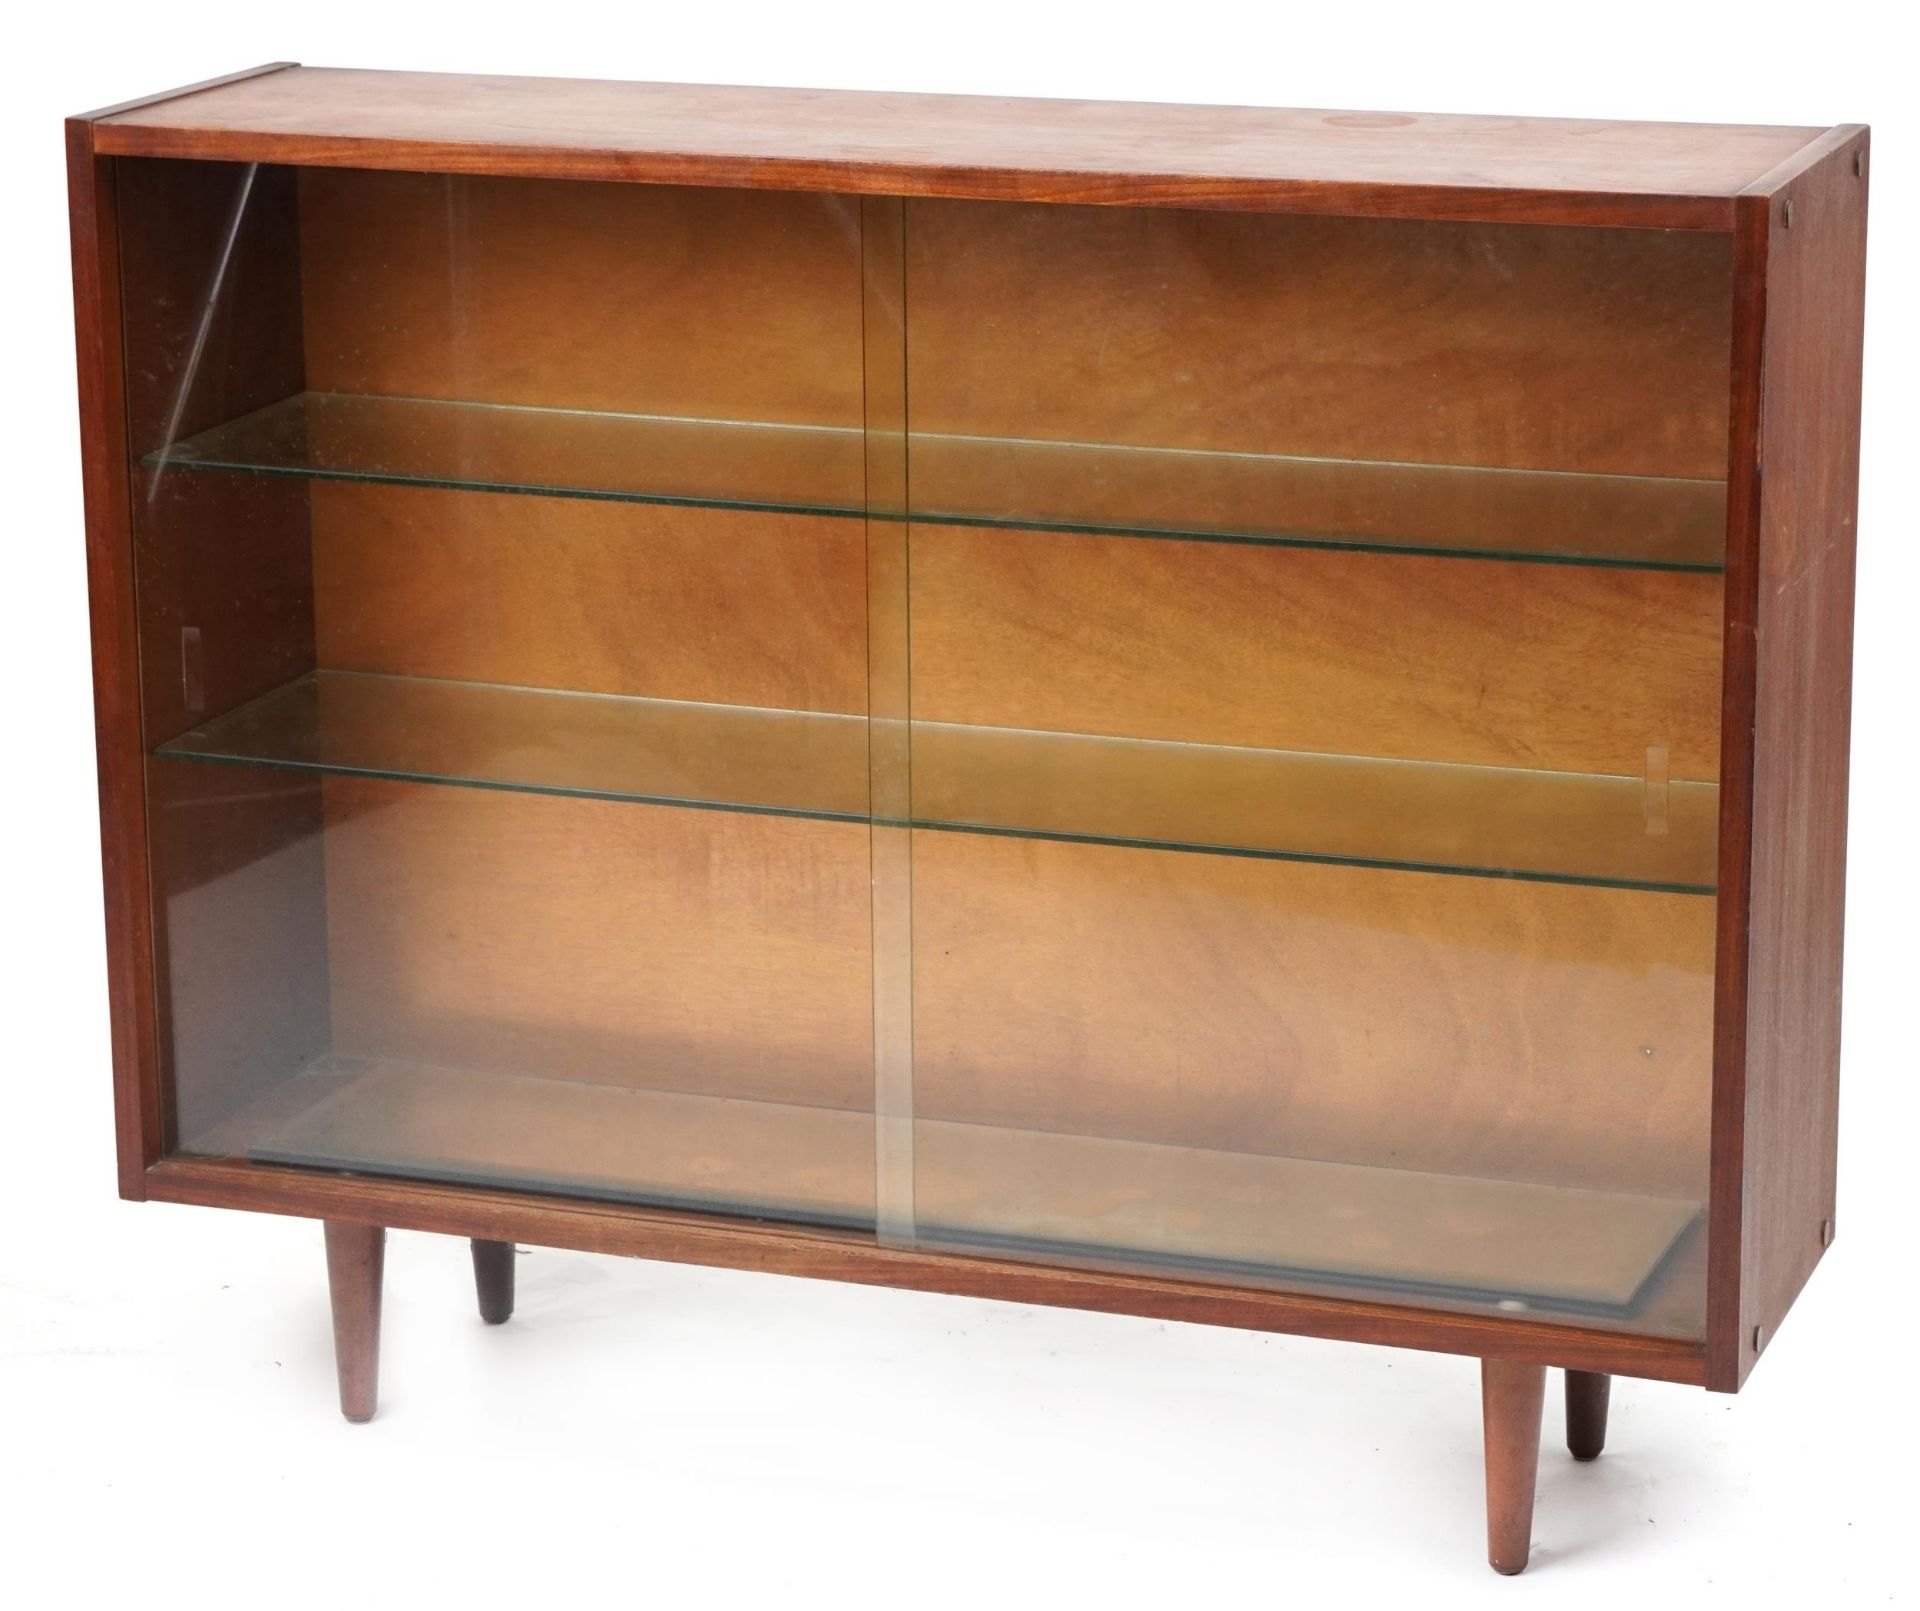 Mid century teak bookcase fitted with two sliding glass doors enclosing two adjustable glass